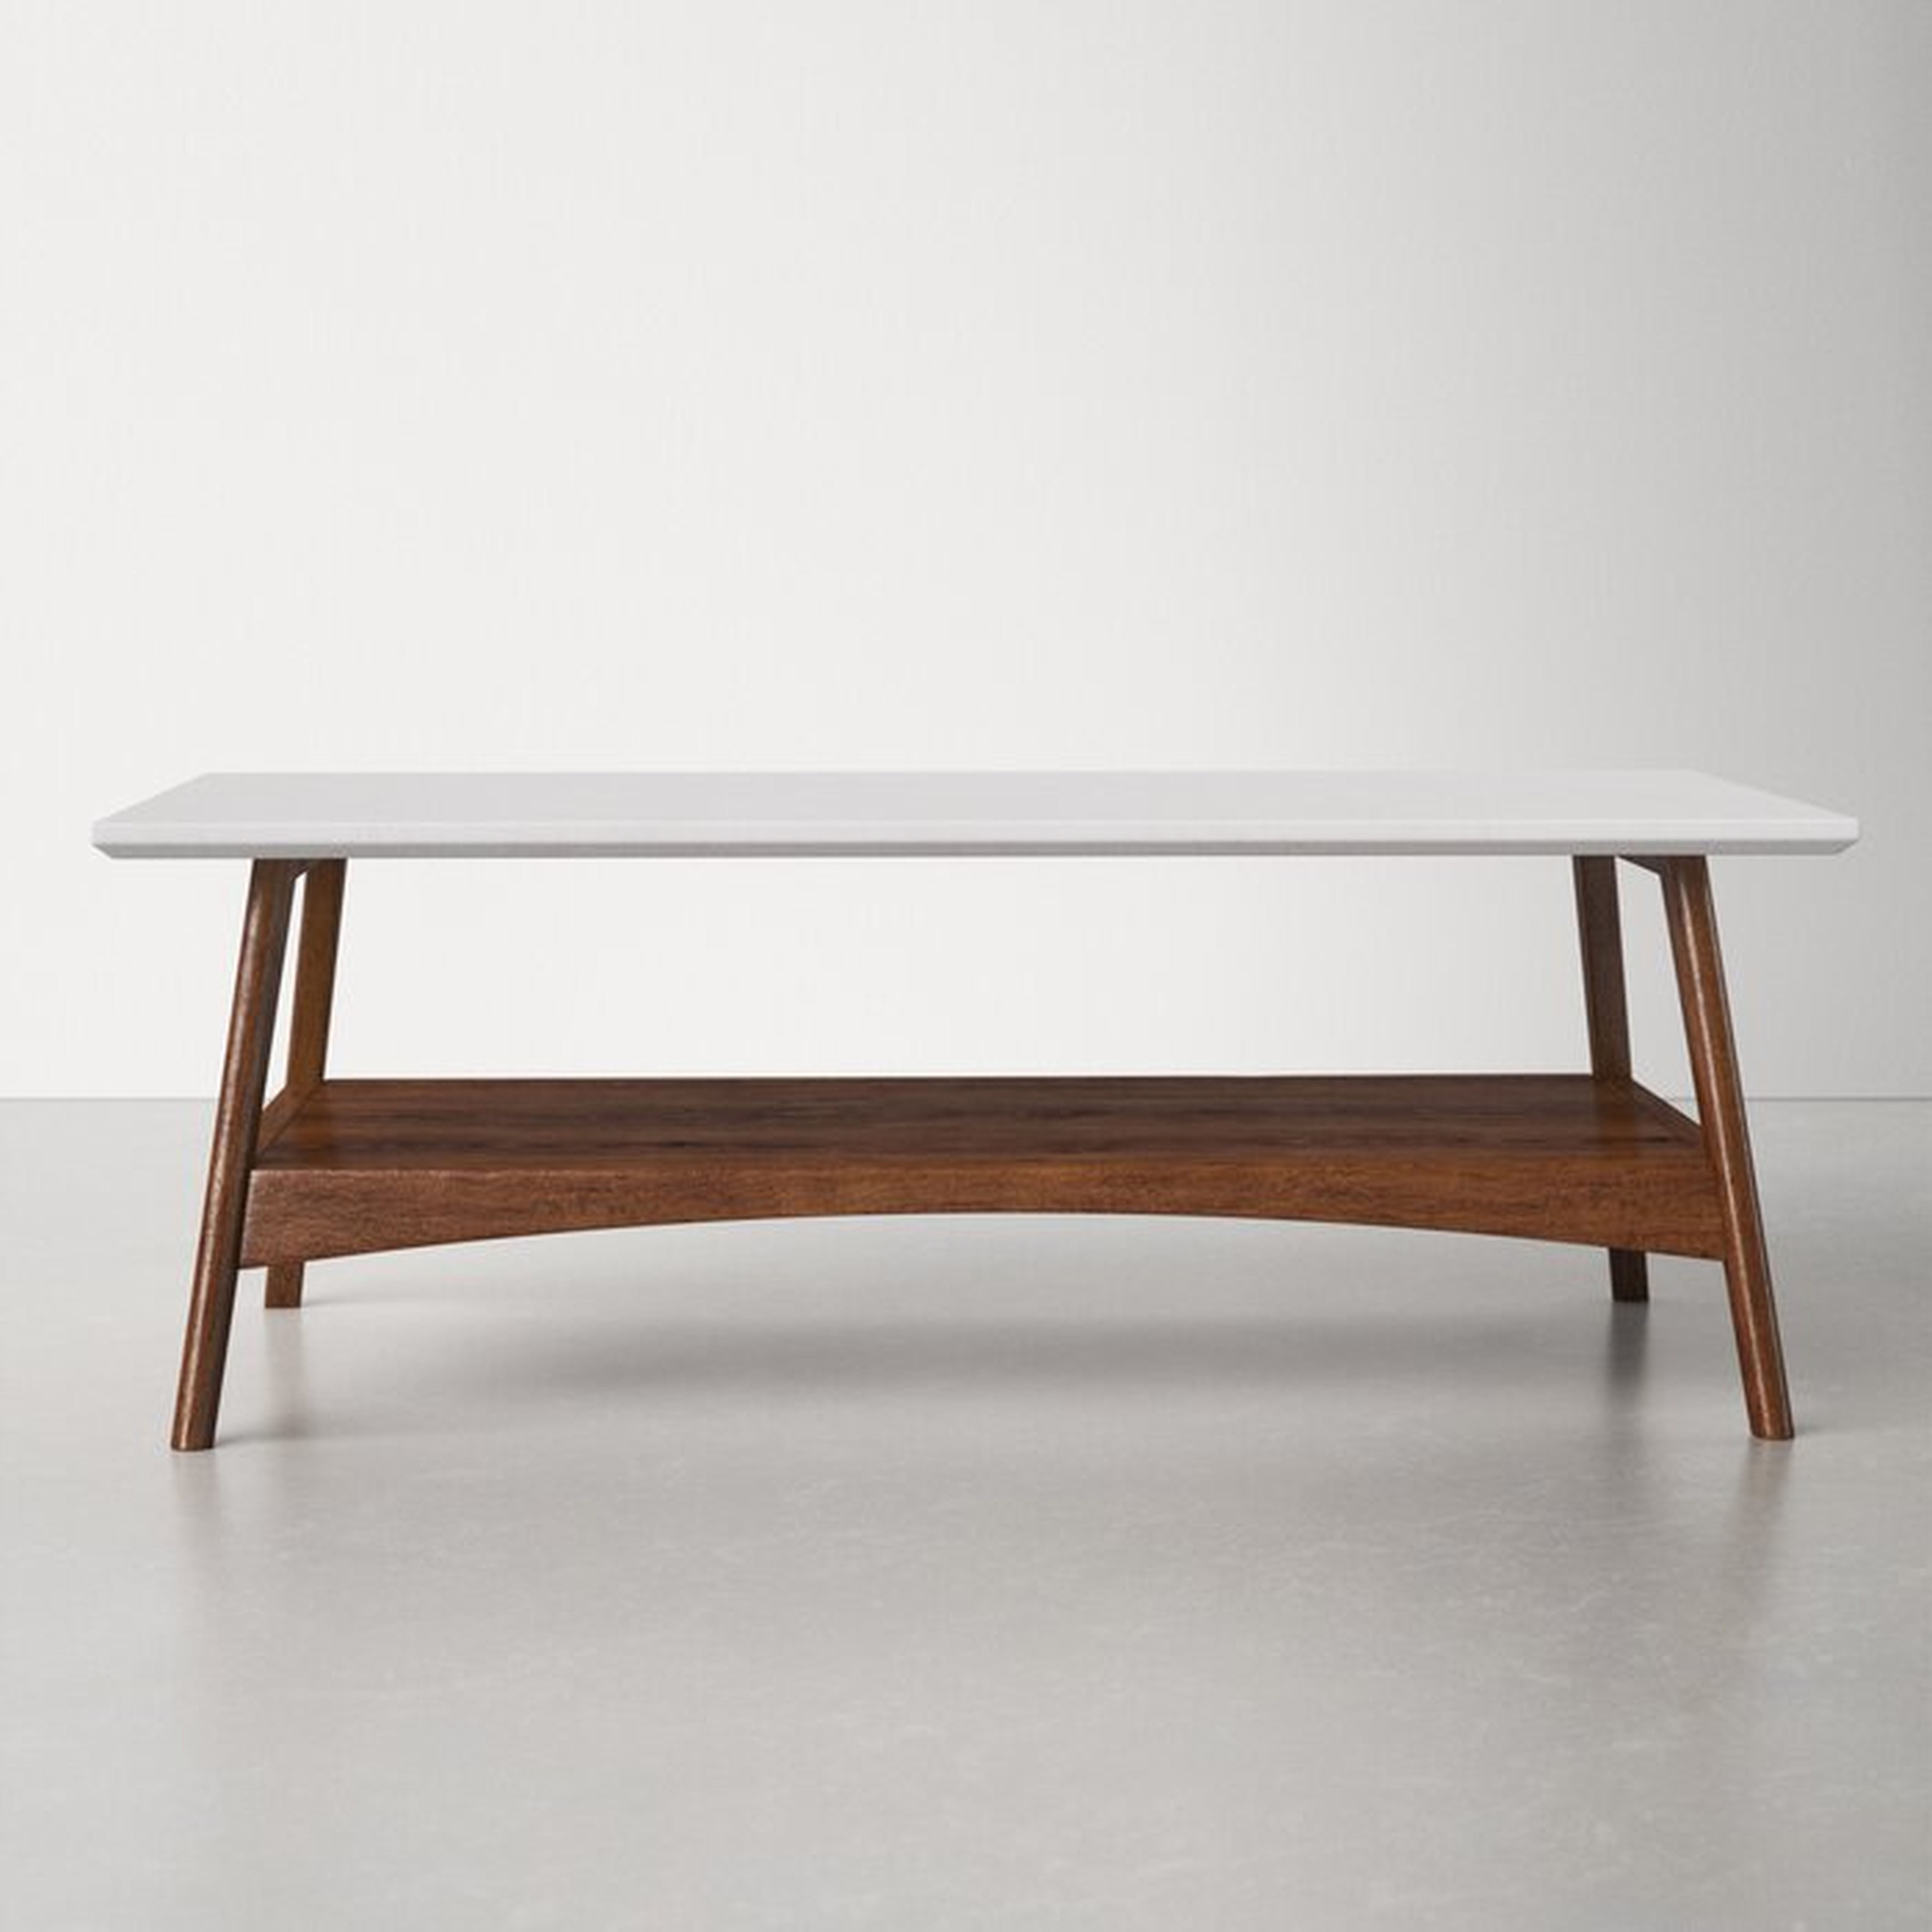 Parker 4 Legs Coffee Table with Storage - AllModern